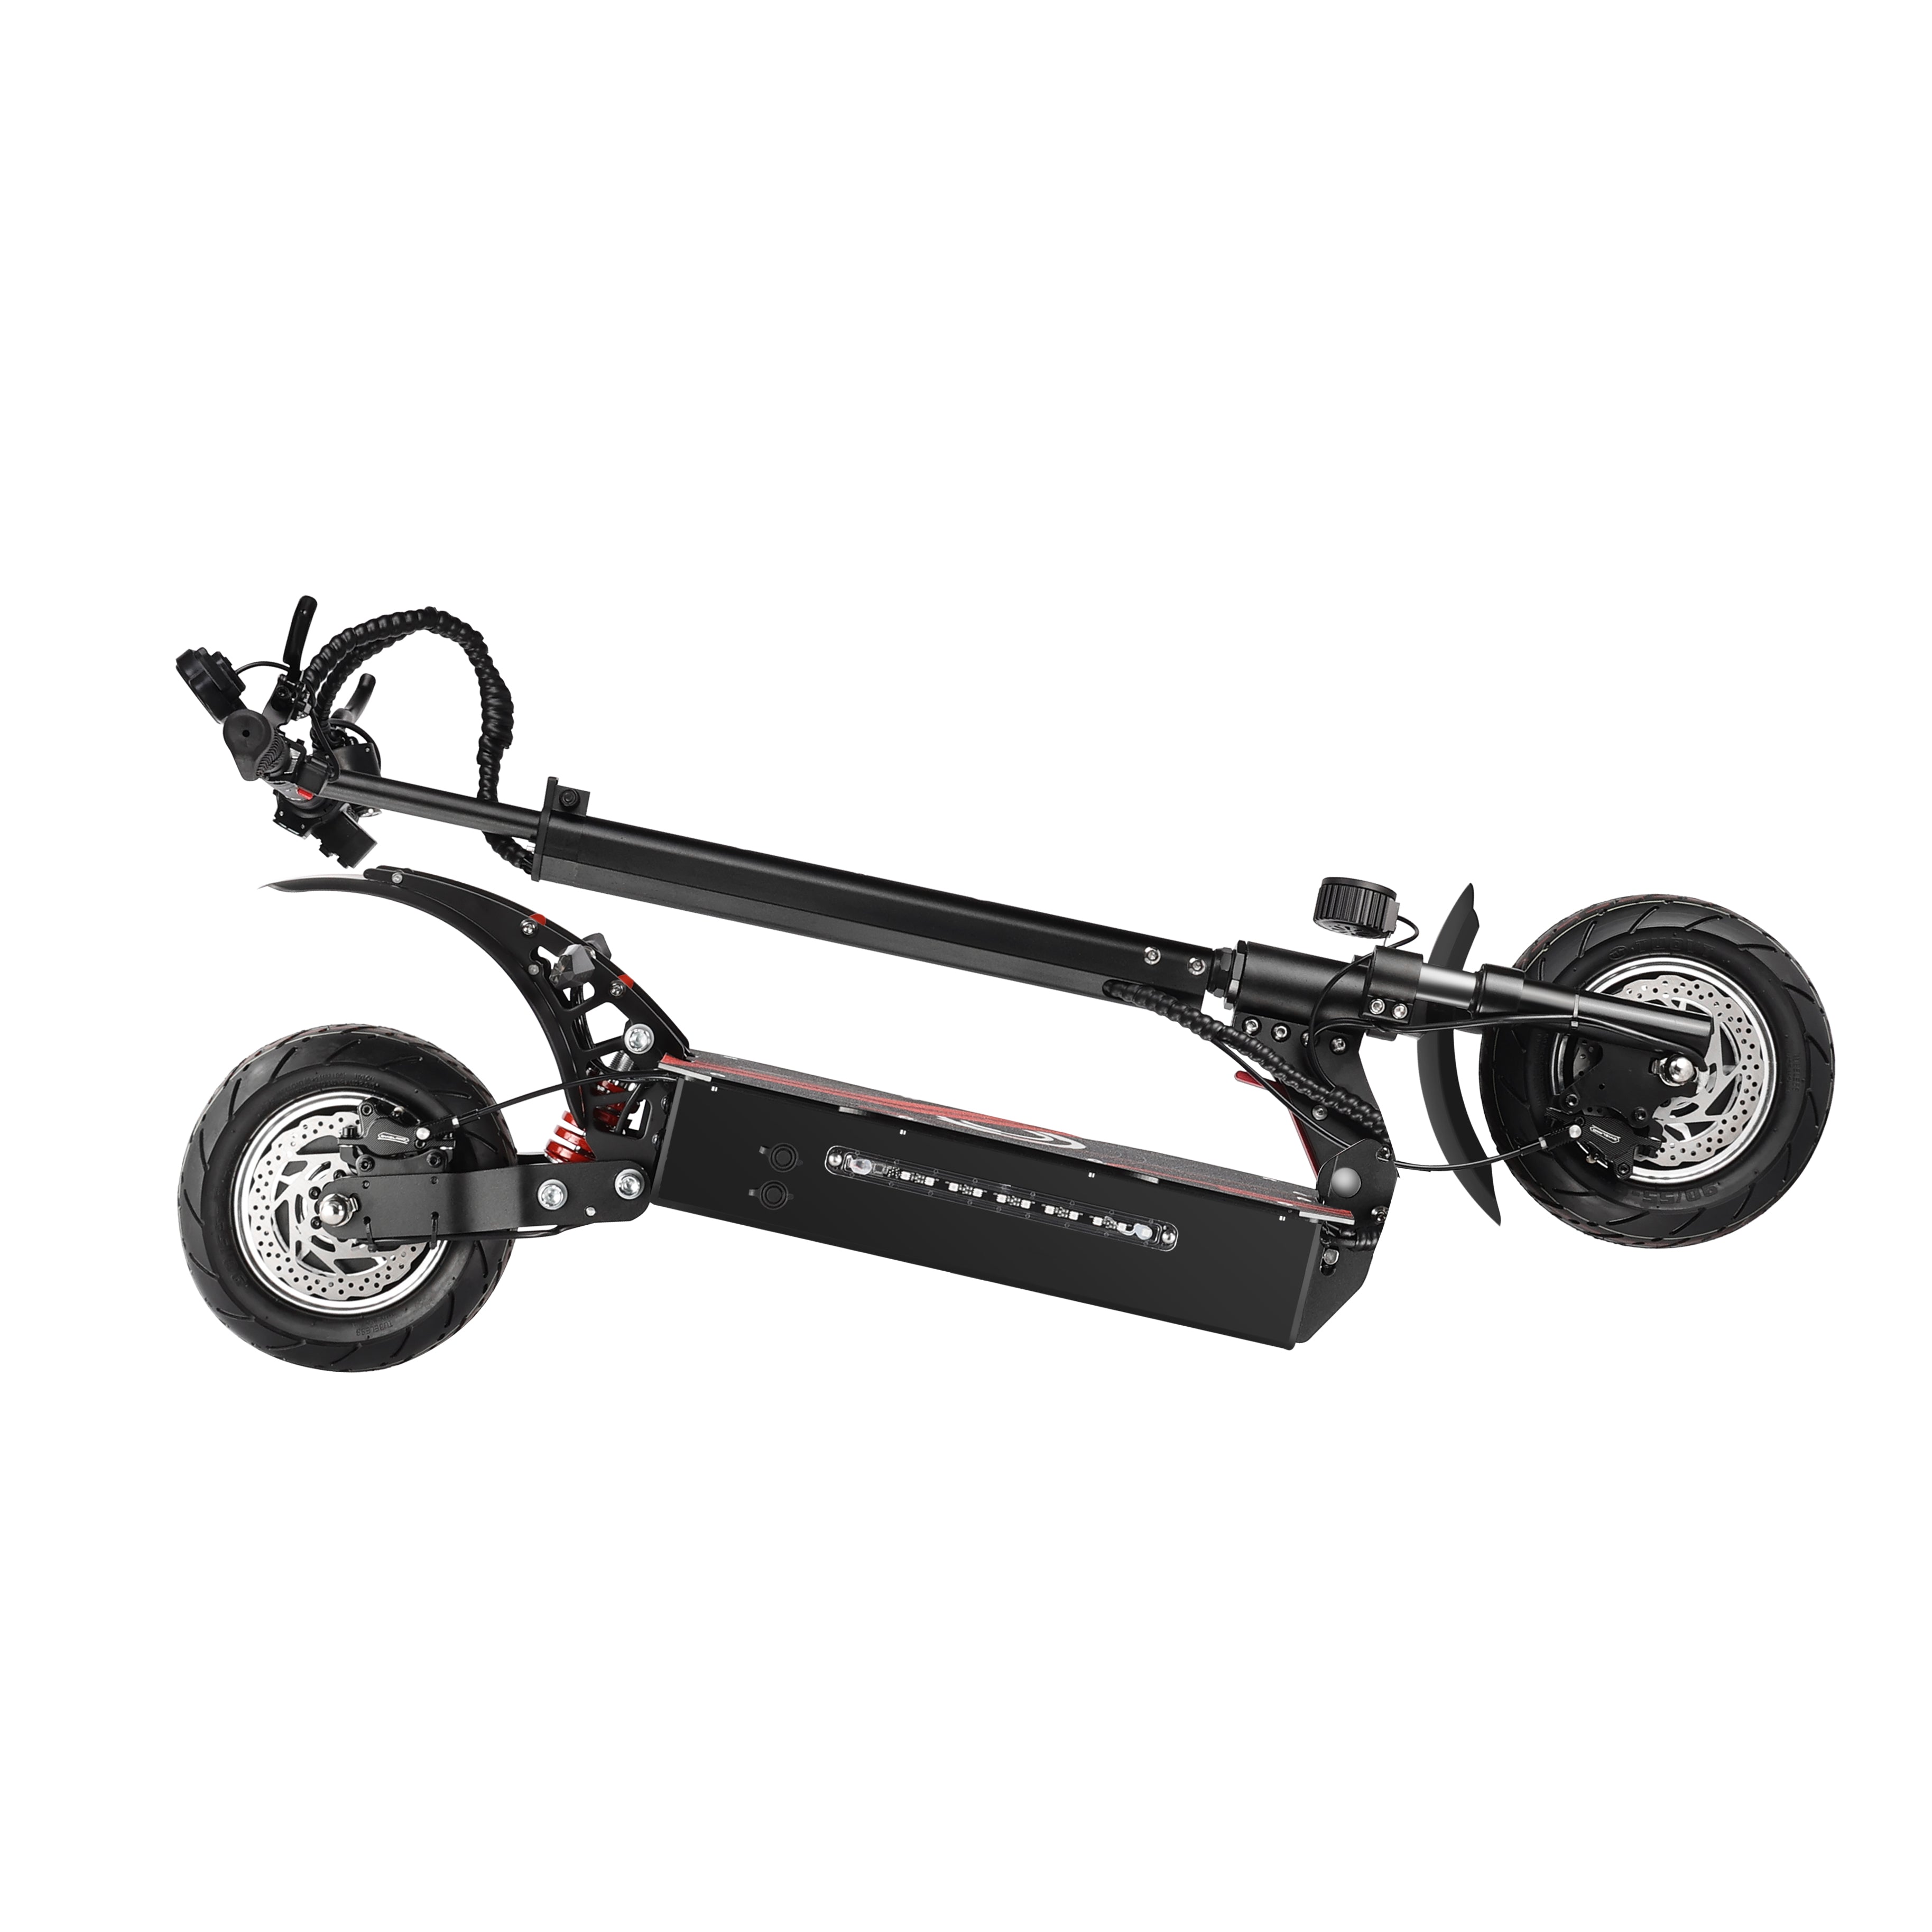 Q7PRO QuickWheel off Road Electric Scooter Motor 3200w, 52v 20ah battery, max speed 45mph, max range 45miles and 10" Tires